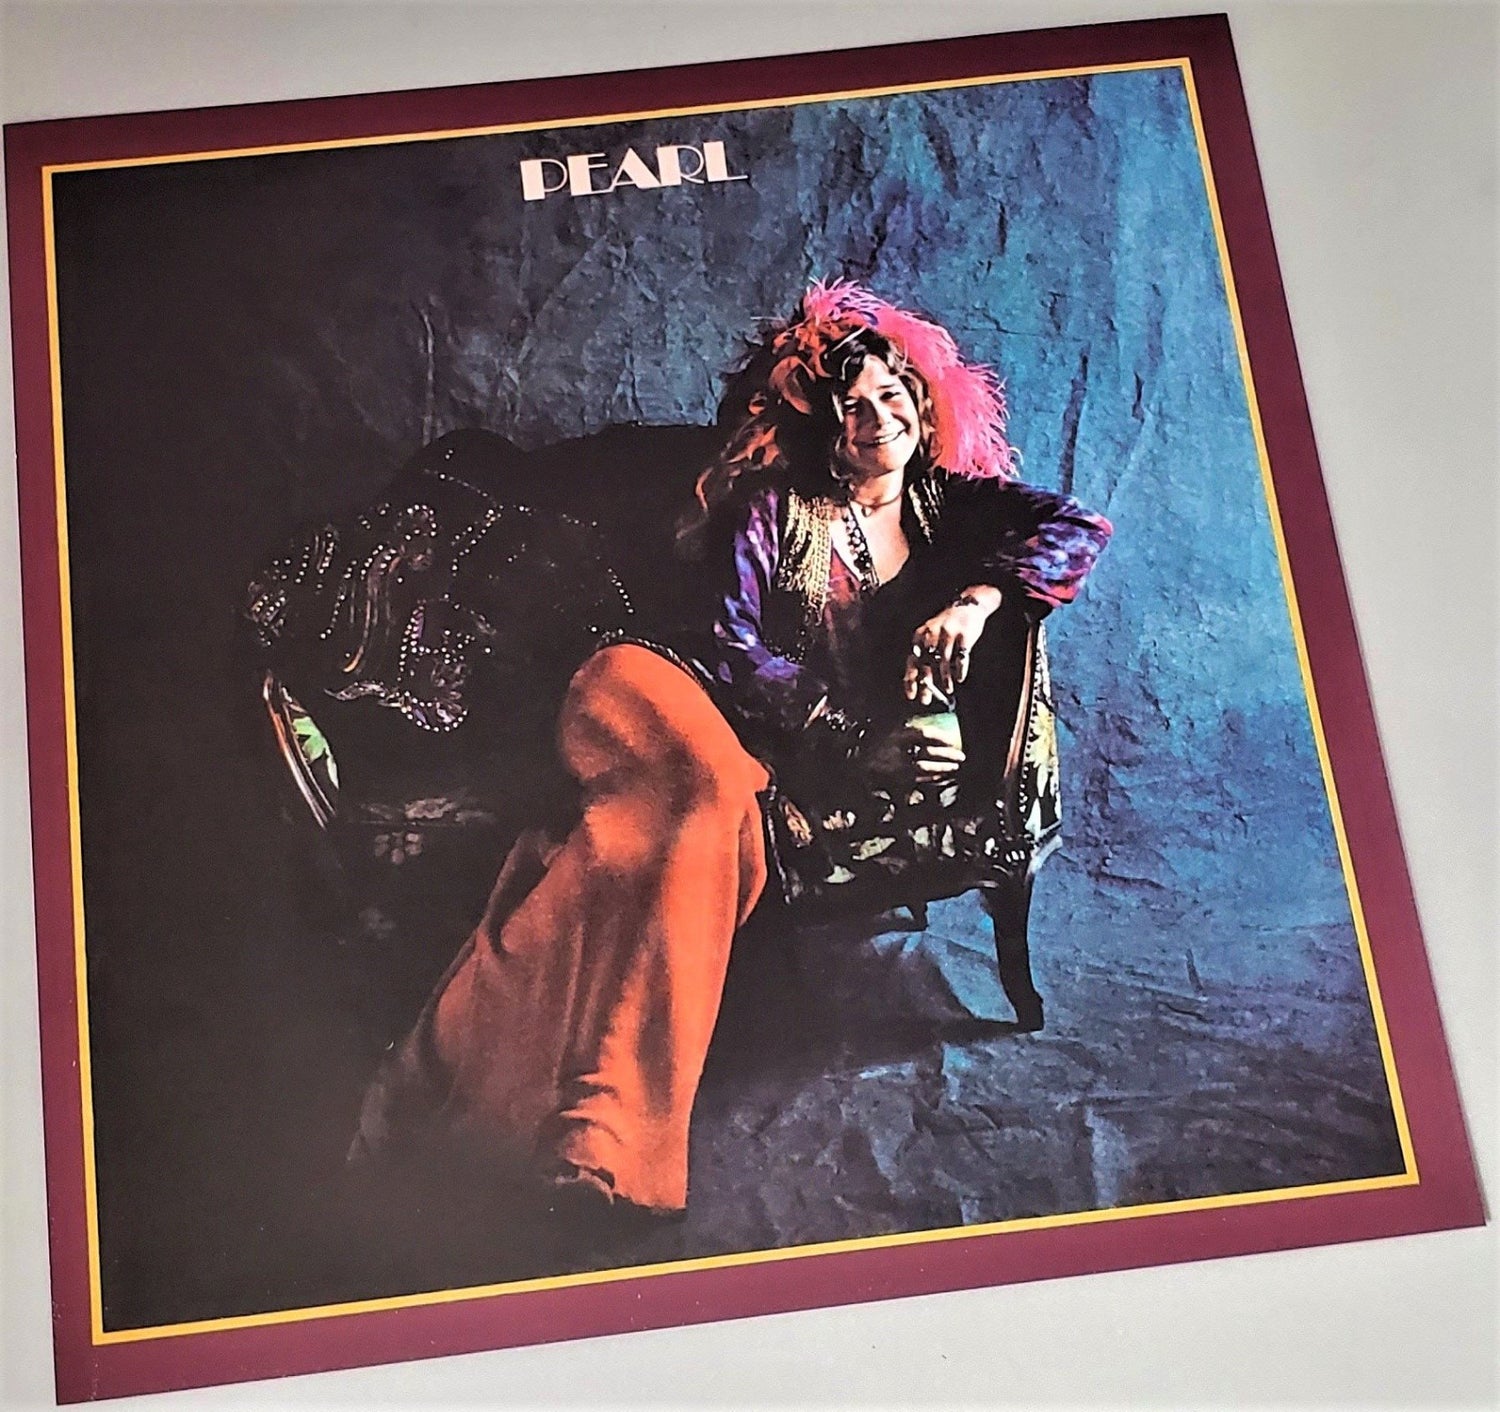 Janis Joplin 1971 Pearl cover art page featured in Rock Covers 2014 coffee table book